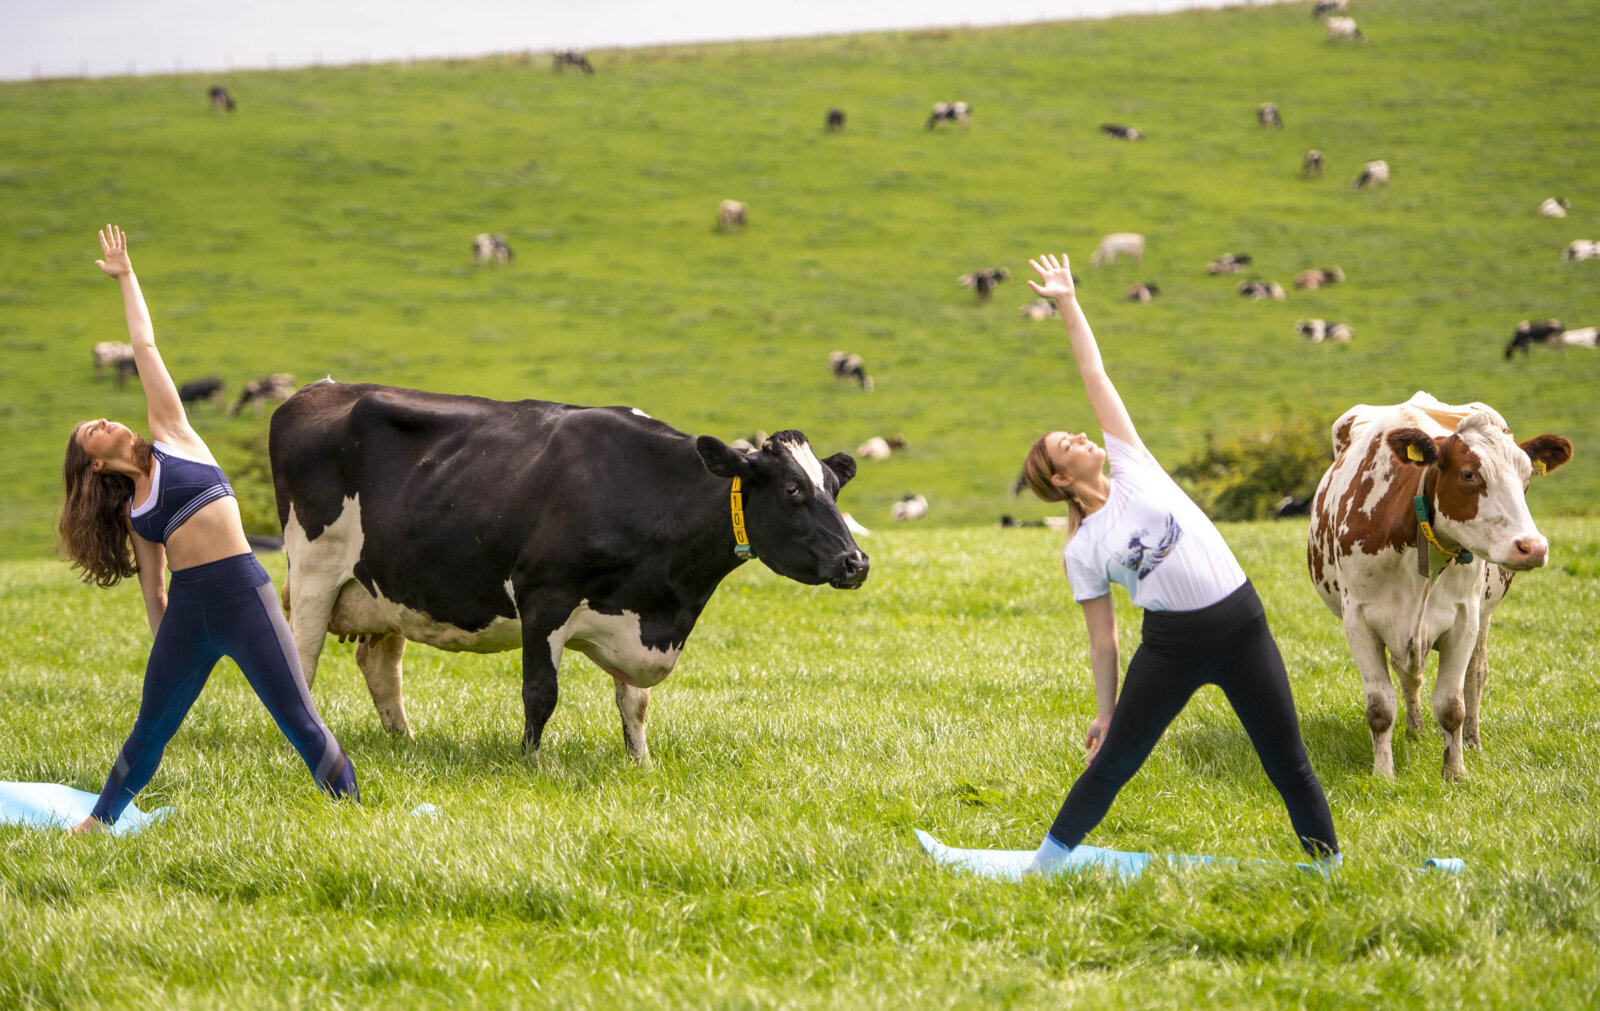 Na-moo-ste: Northerners are trying to get fit by doing yoga with cows on farms, The Manc